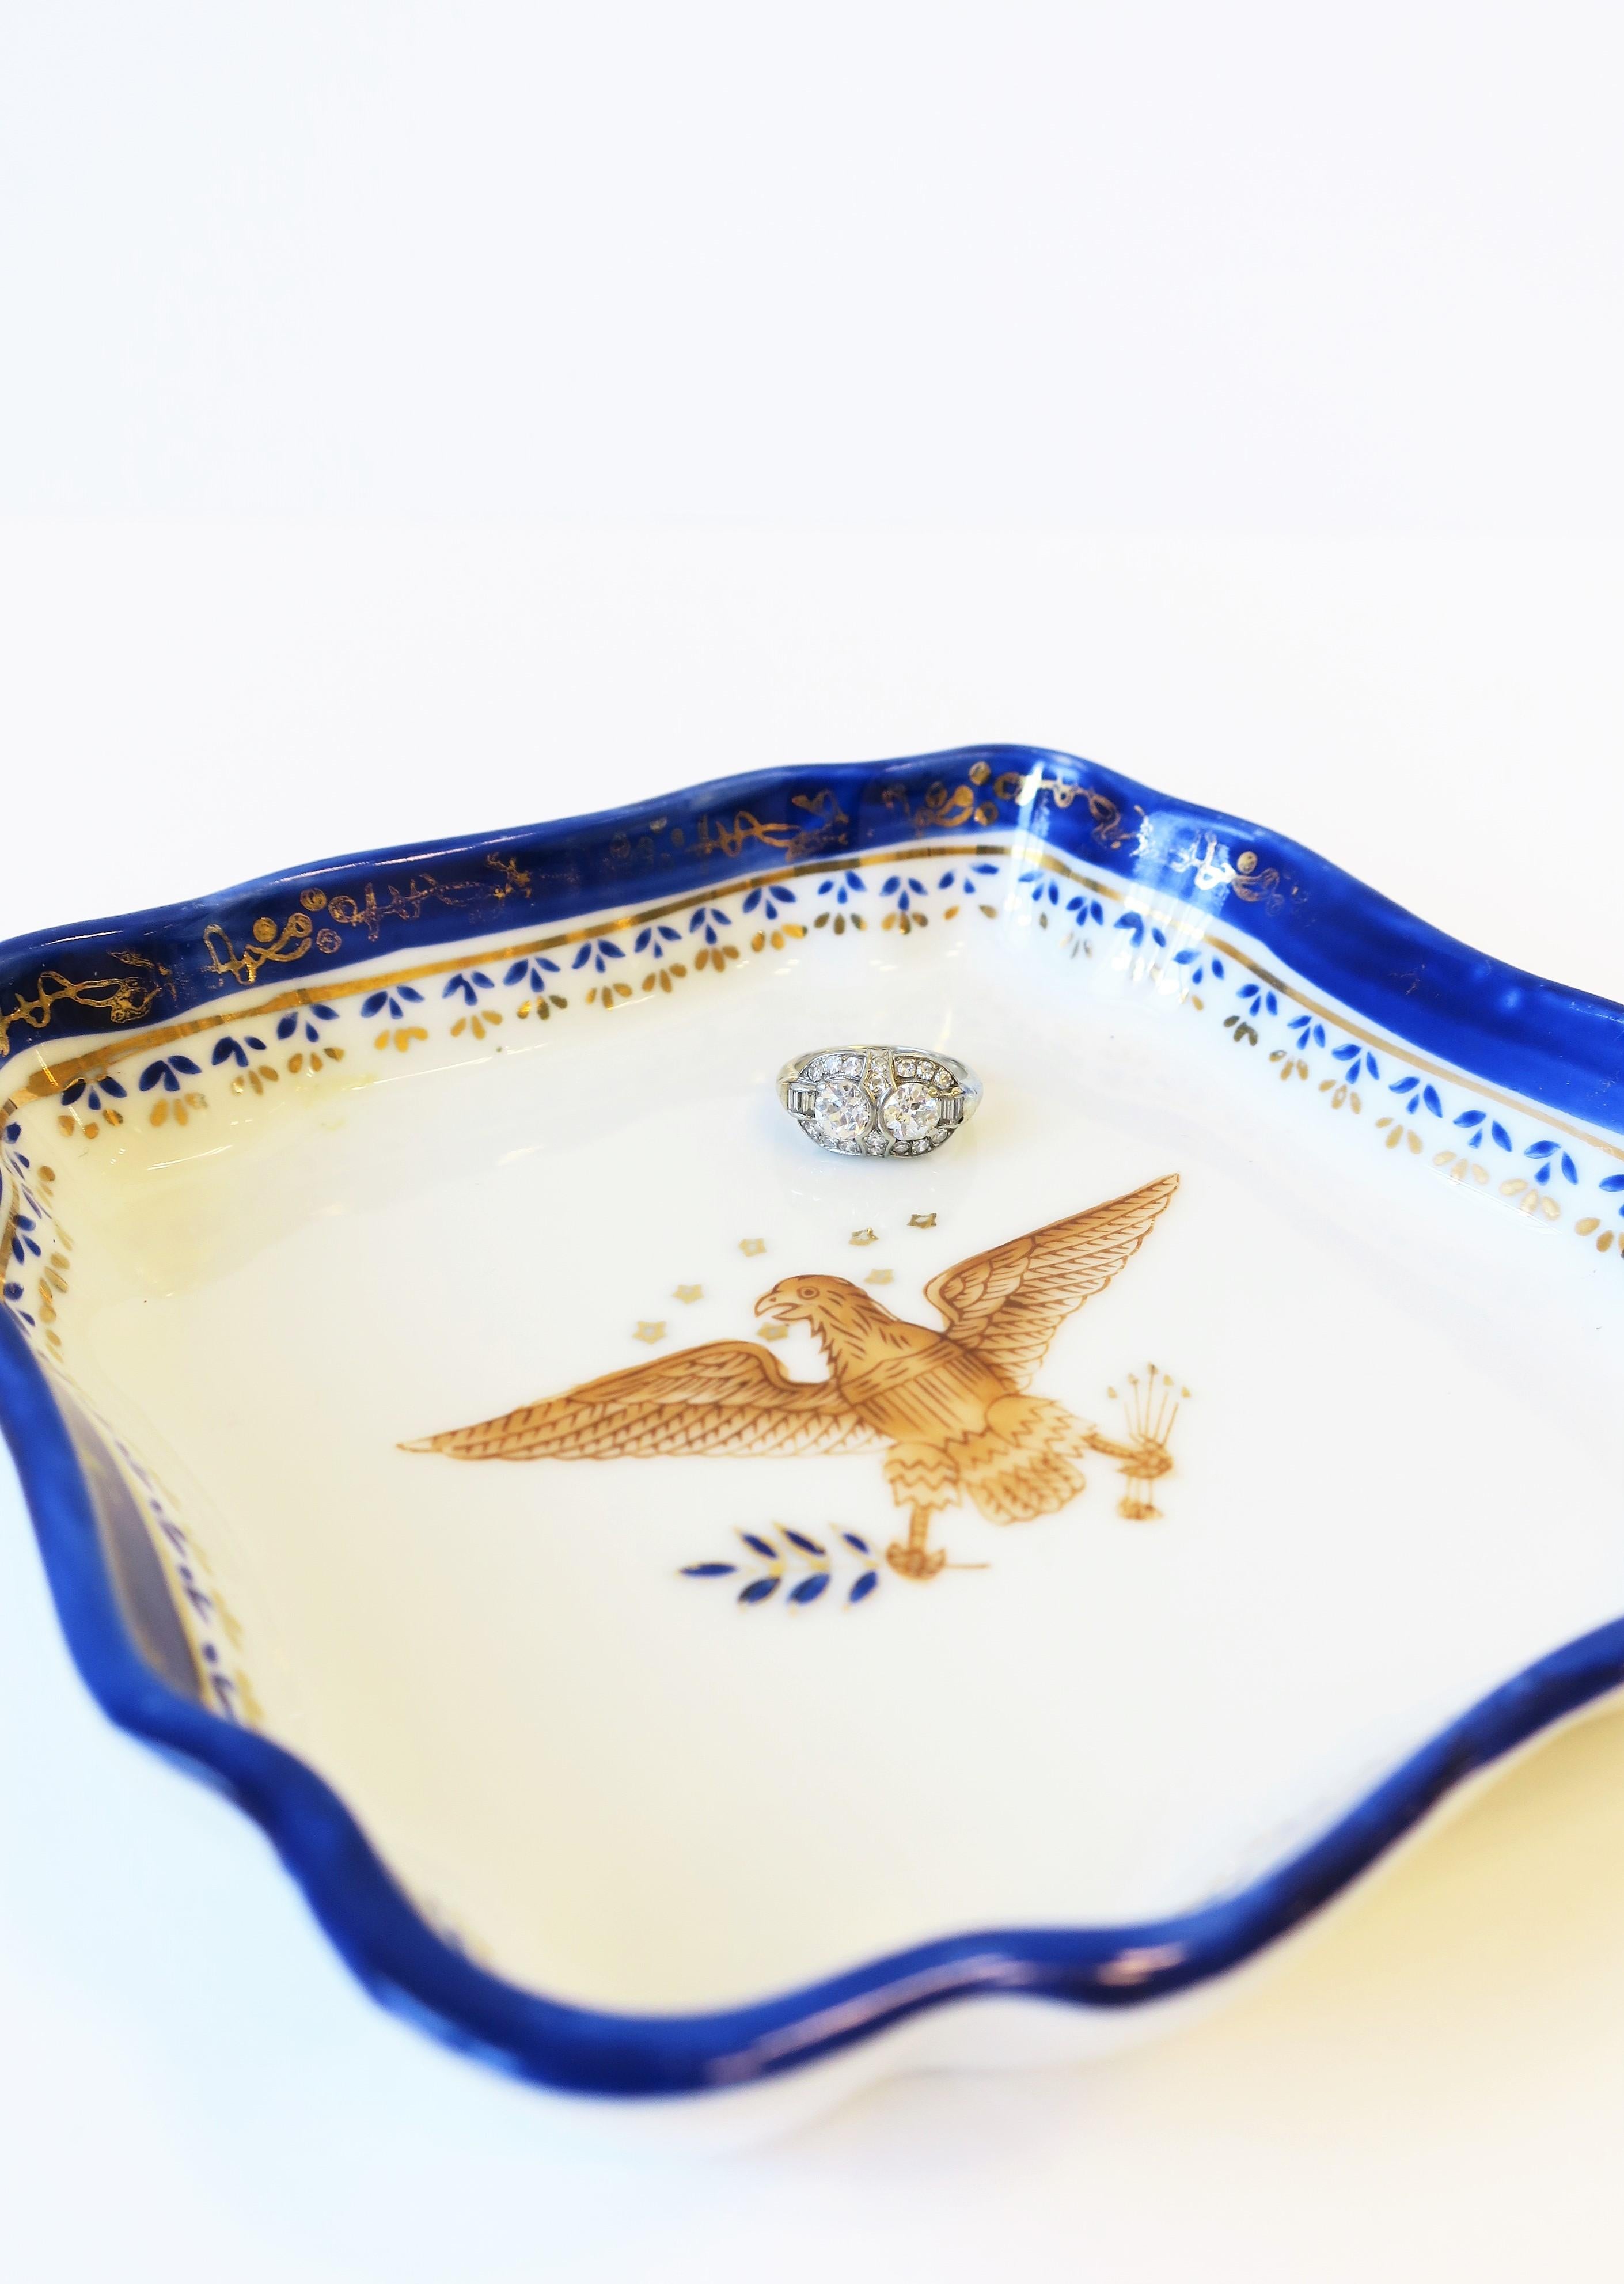 Federal Design Blue Gold White Porcelain Jewelry or Trinket Dish with Eagle Bird 5